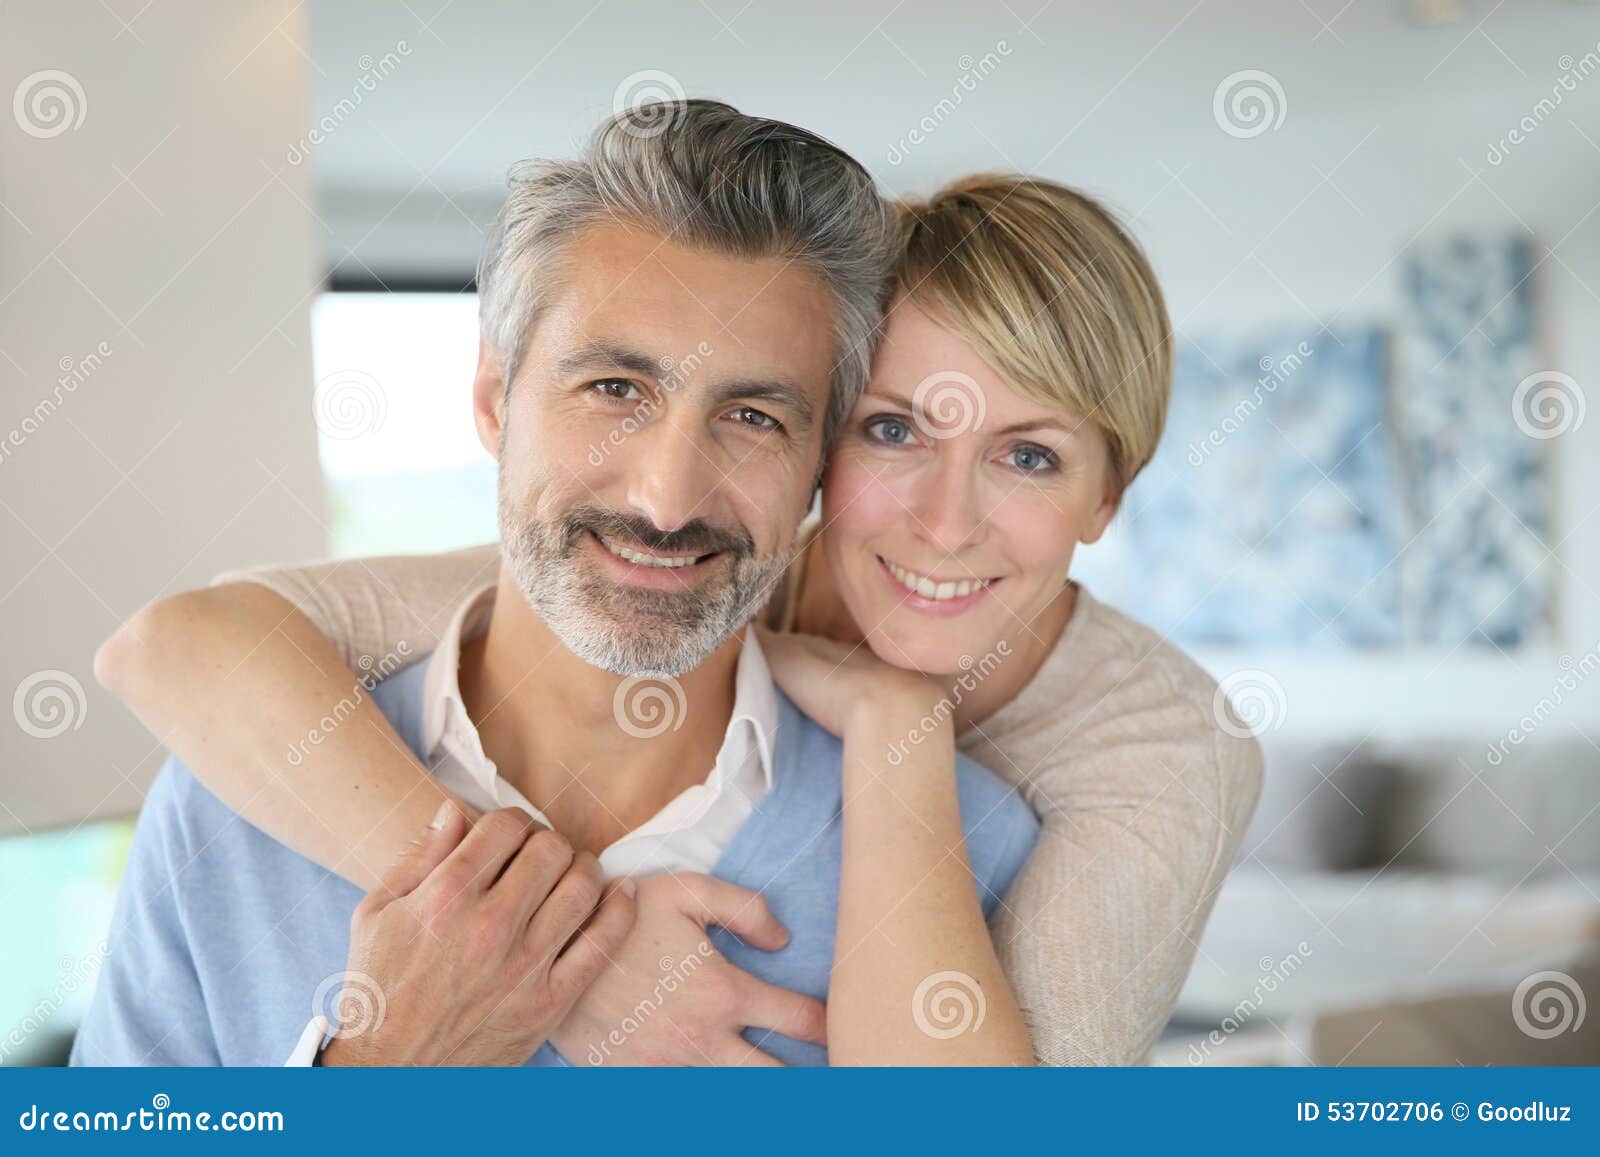 smiling middle-aged couple at home